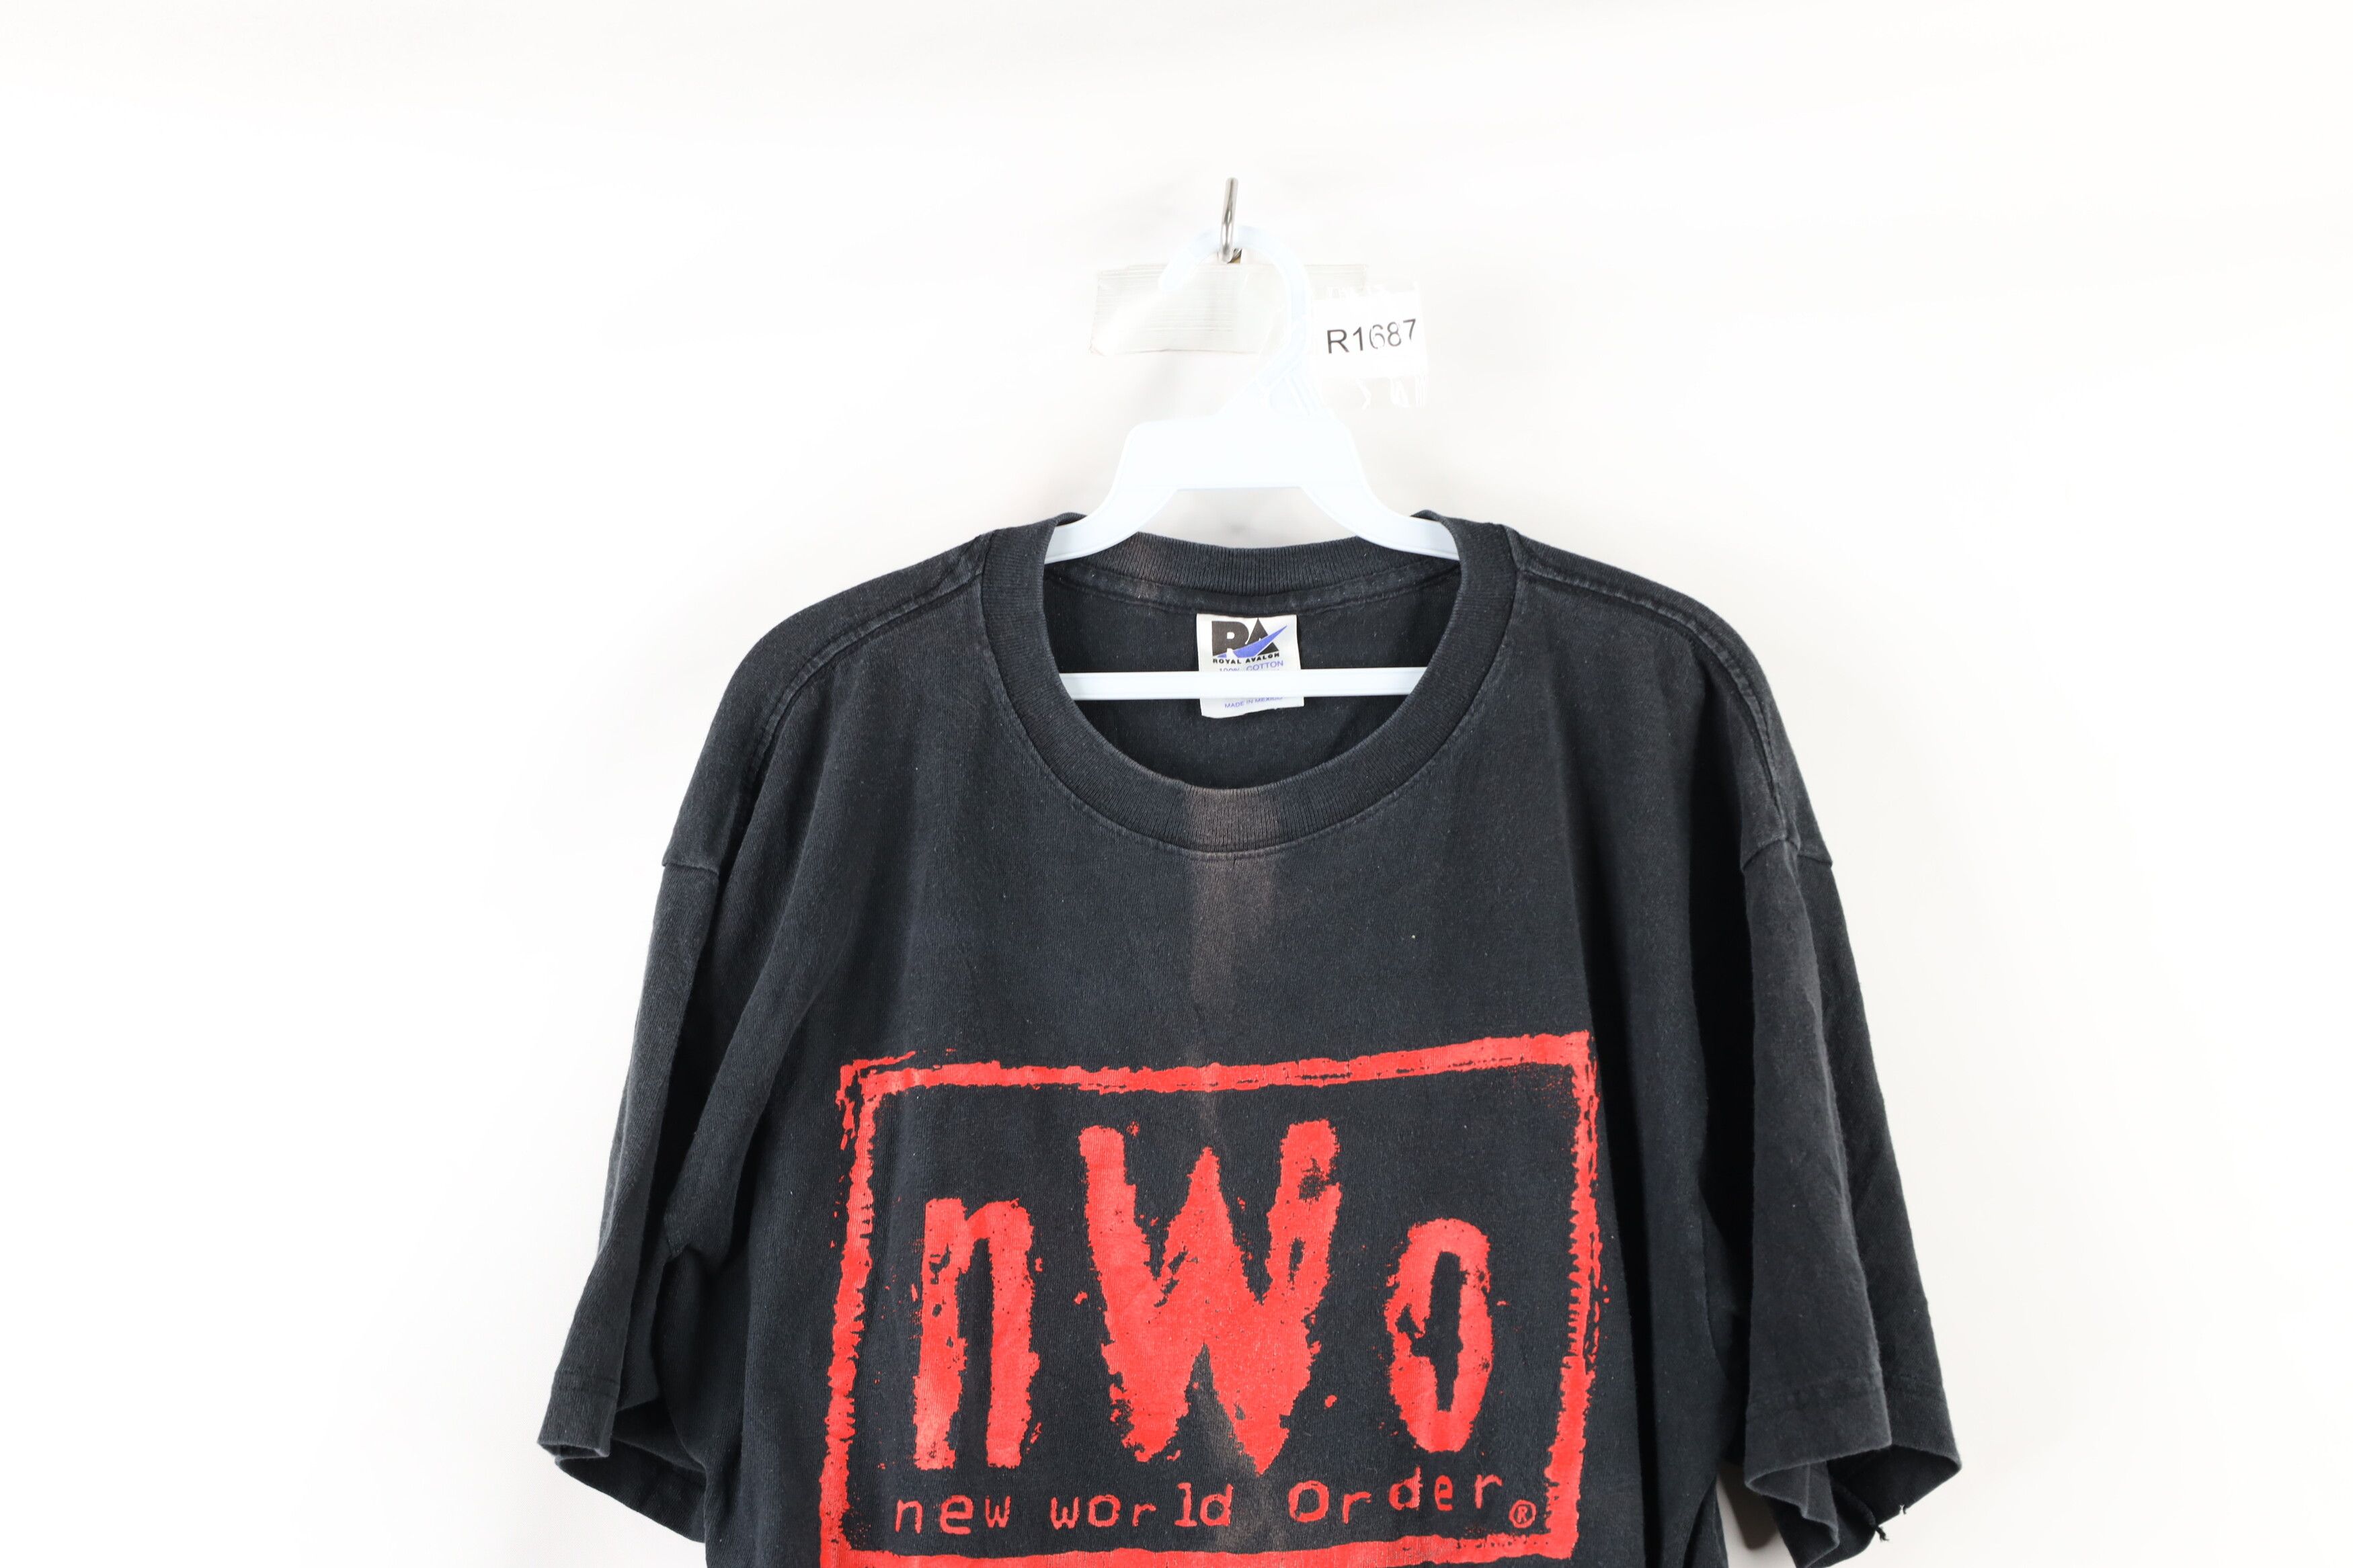 Vintage Vintage 90s WCW Out NWO New World Order Wrestling T-Shirt Size US XL / EU 56 / 4 - 2 Preview